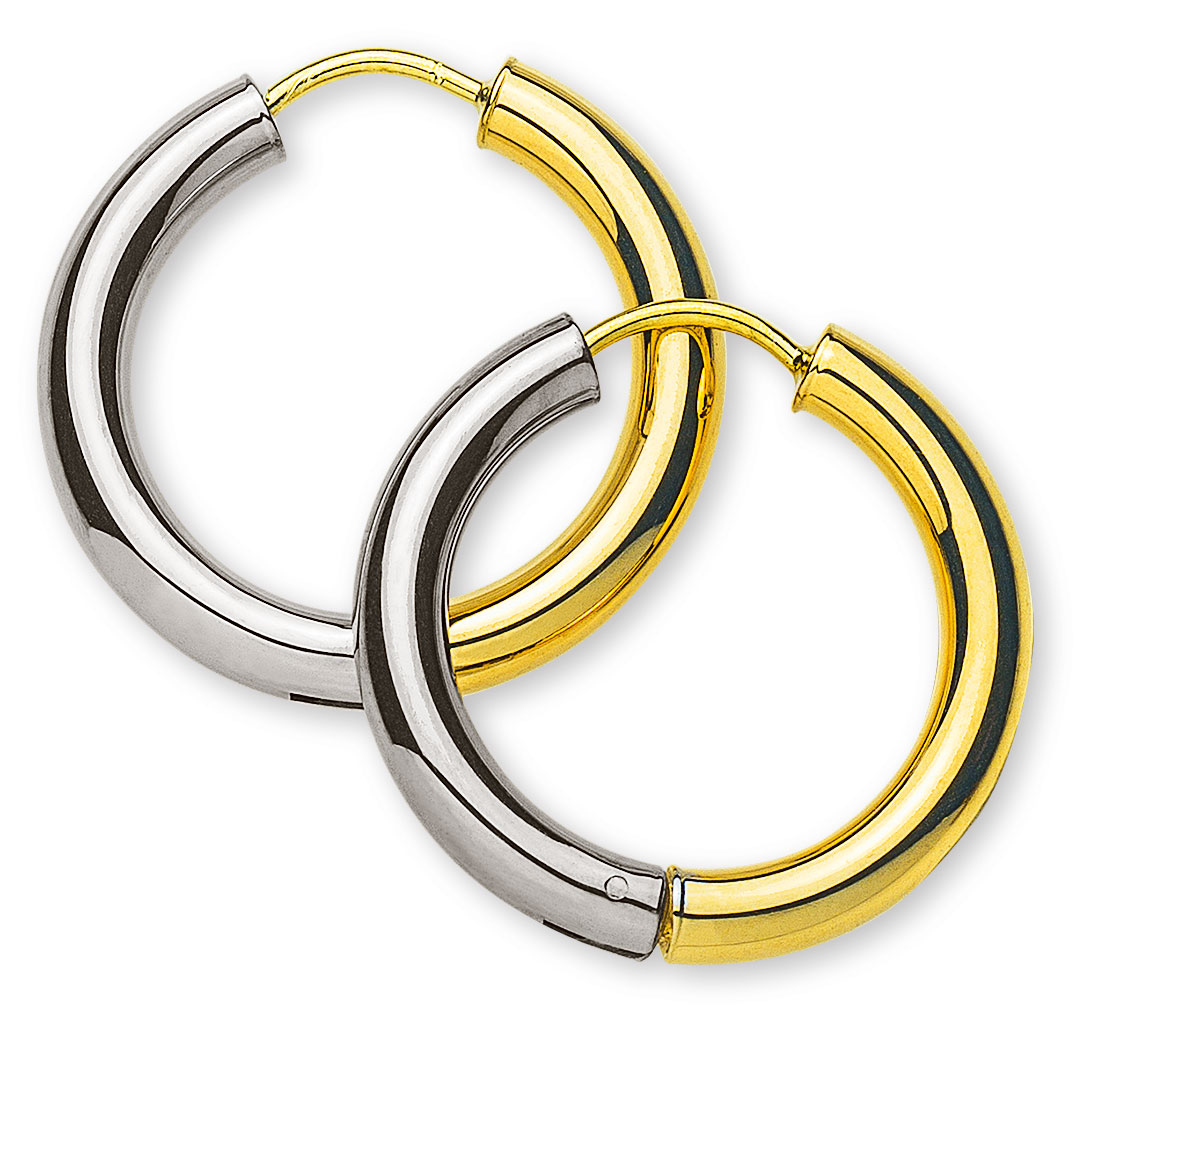 AURONOS Prestige Creoles 18K Yellow and White Gold Ø 21mm